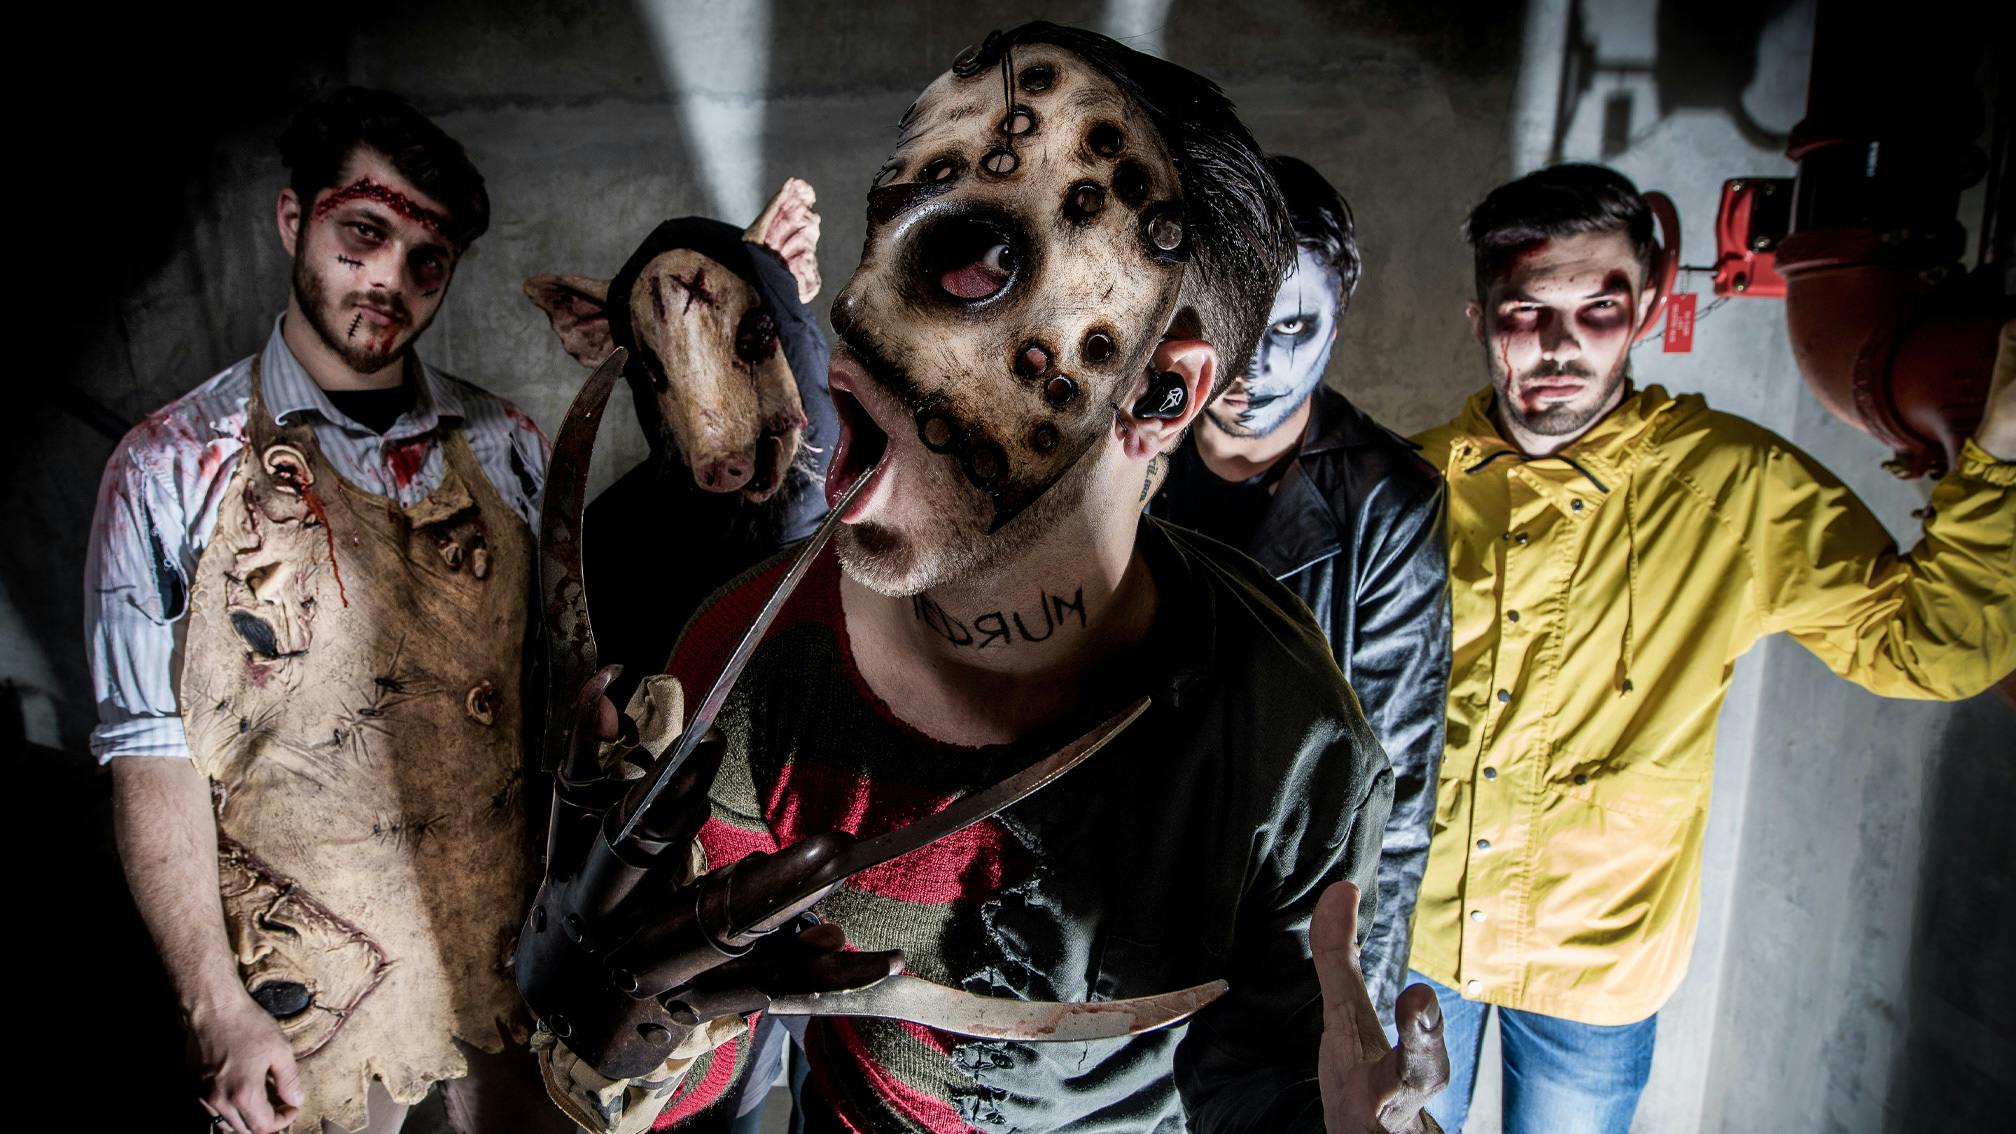 Ice Nine Kills Release Friday The 13th-Themed Cover Of Stacy's Mom